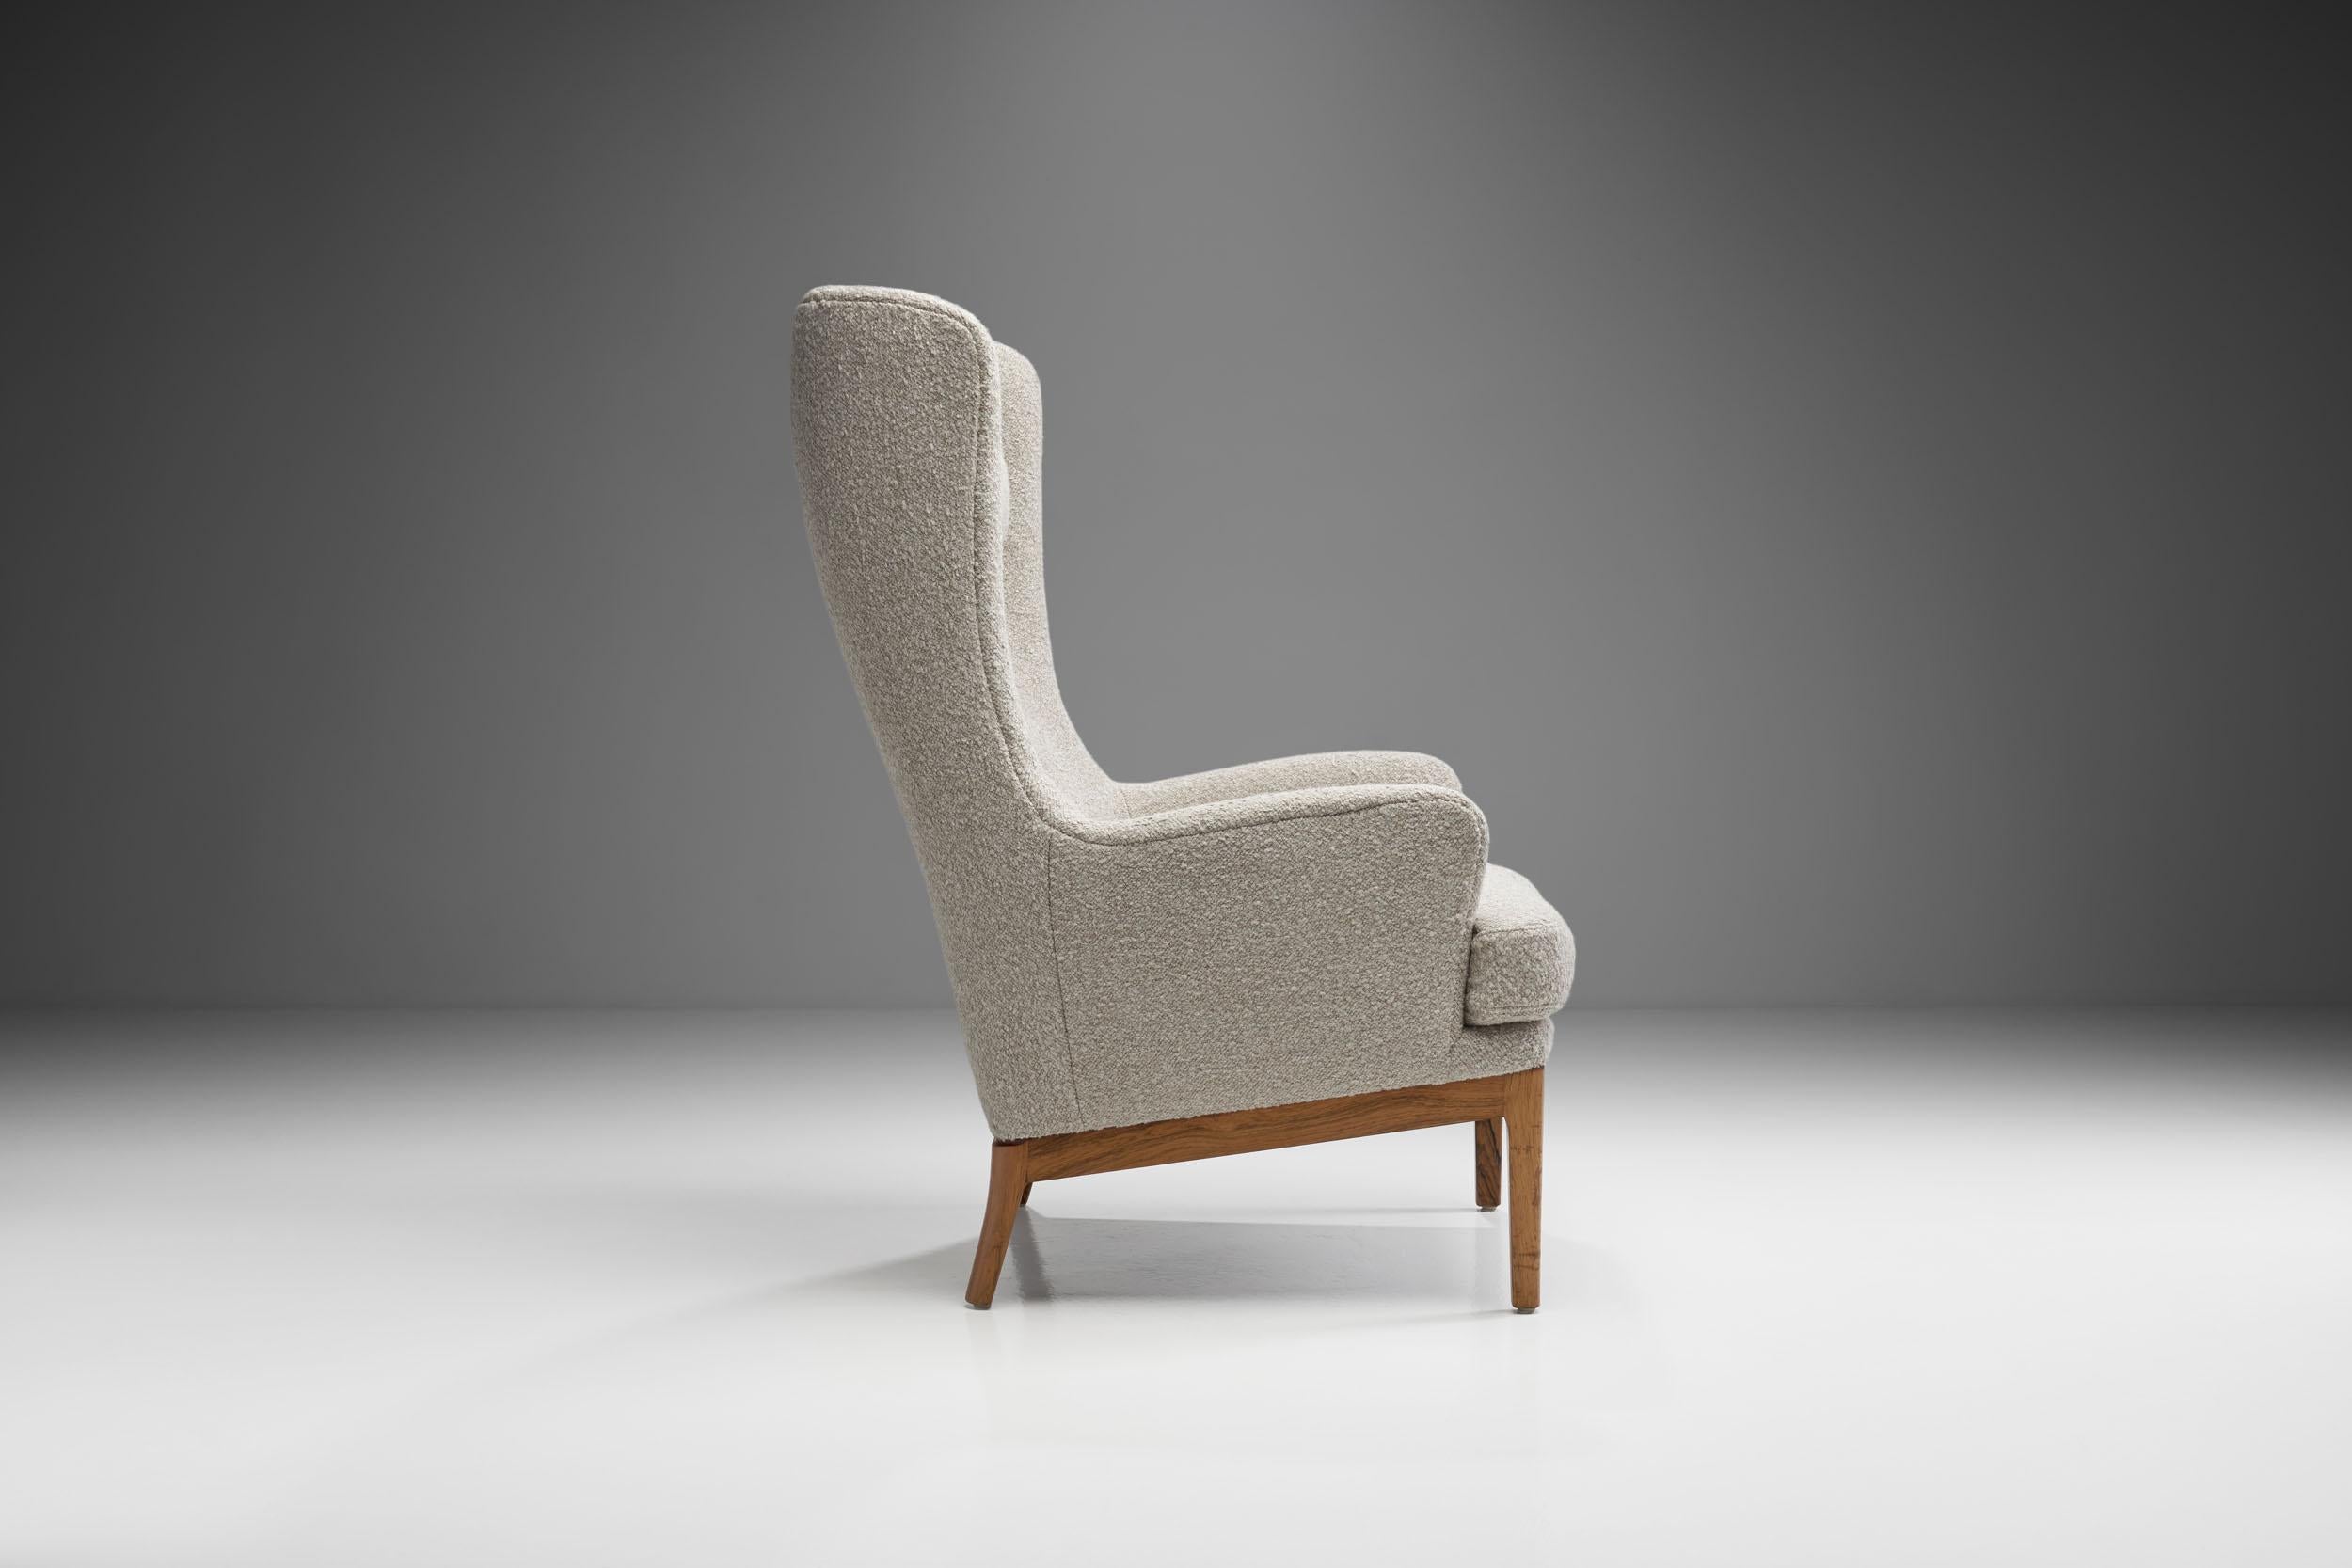 Mid-20th Century “Krister” Armchair by Arne Norell for AB Arne Norell Aneby, Sweden, 1960s